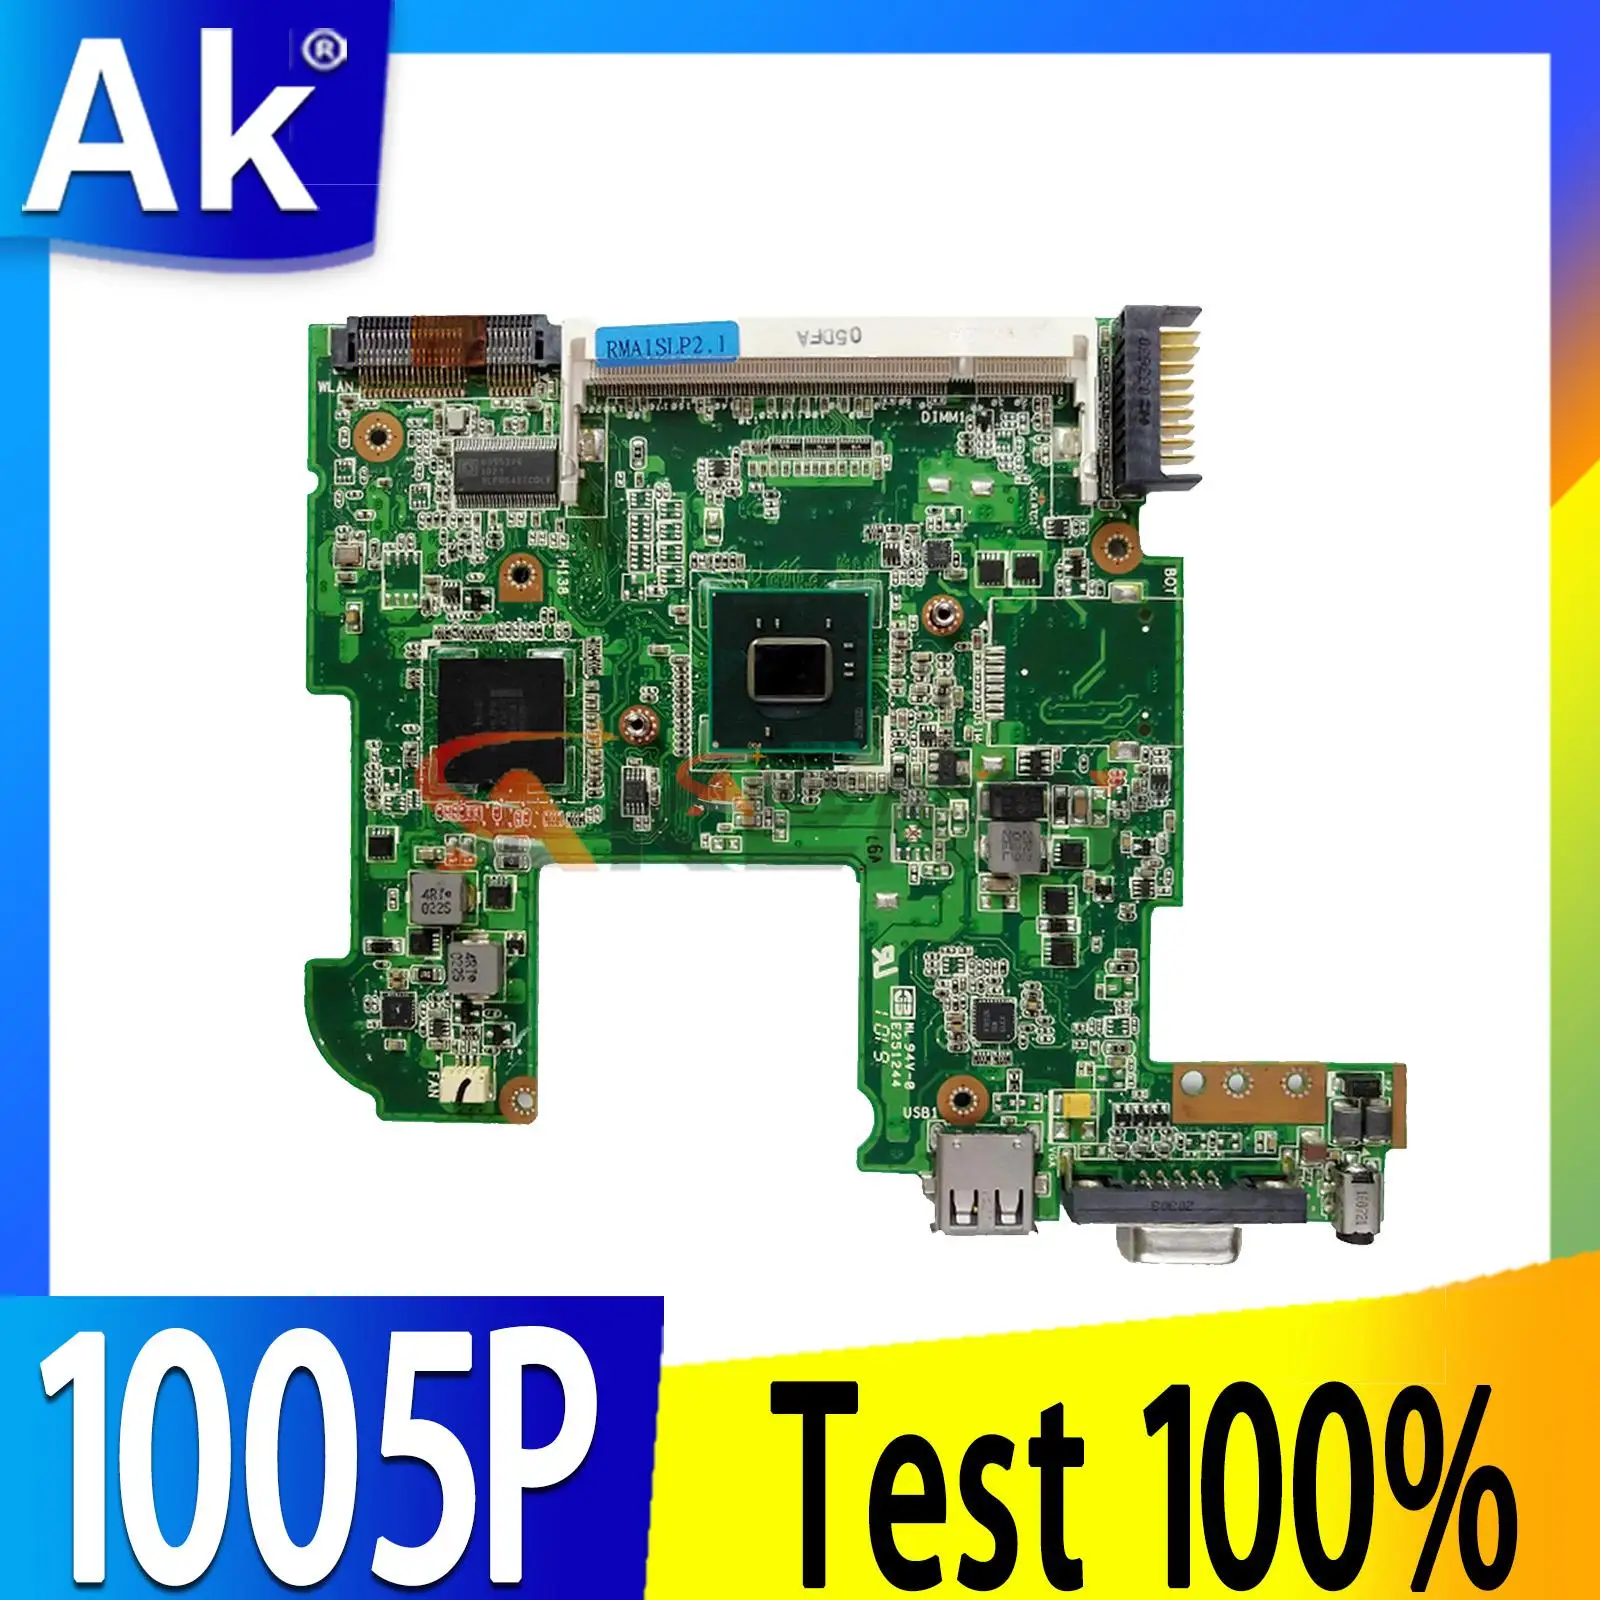 

1005P REV:1.2G Motherboard For ASUS Eee PC 1005P Laptop motherboard 1005P Mainboard Tested Working fully tested free shipping